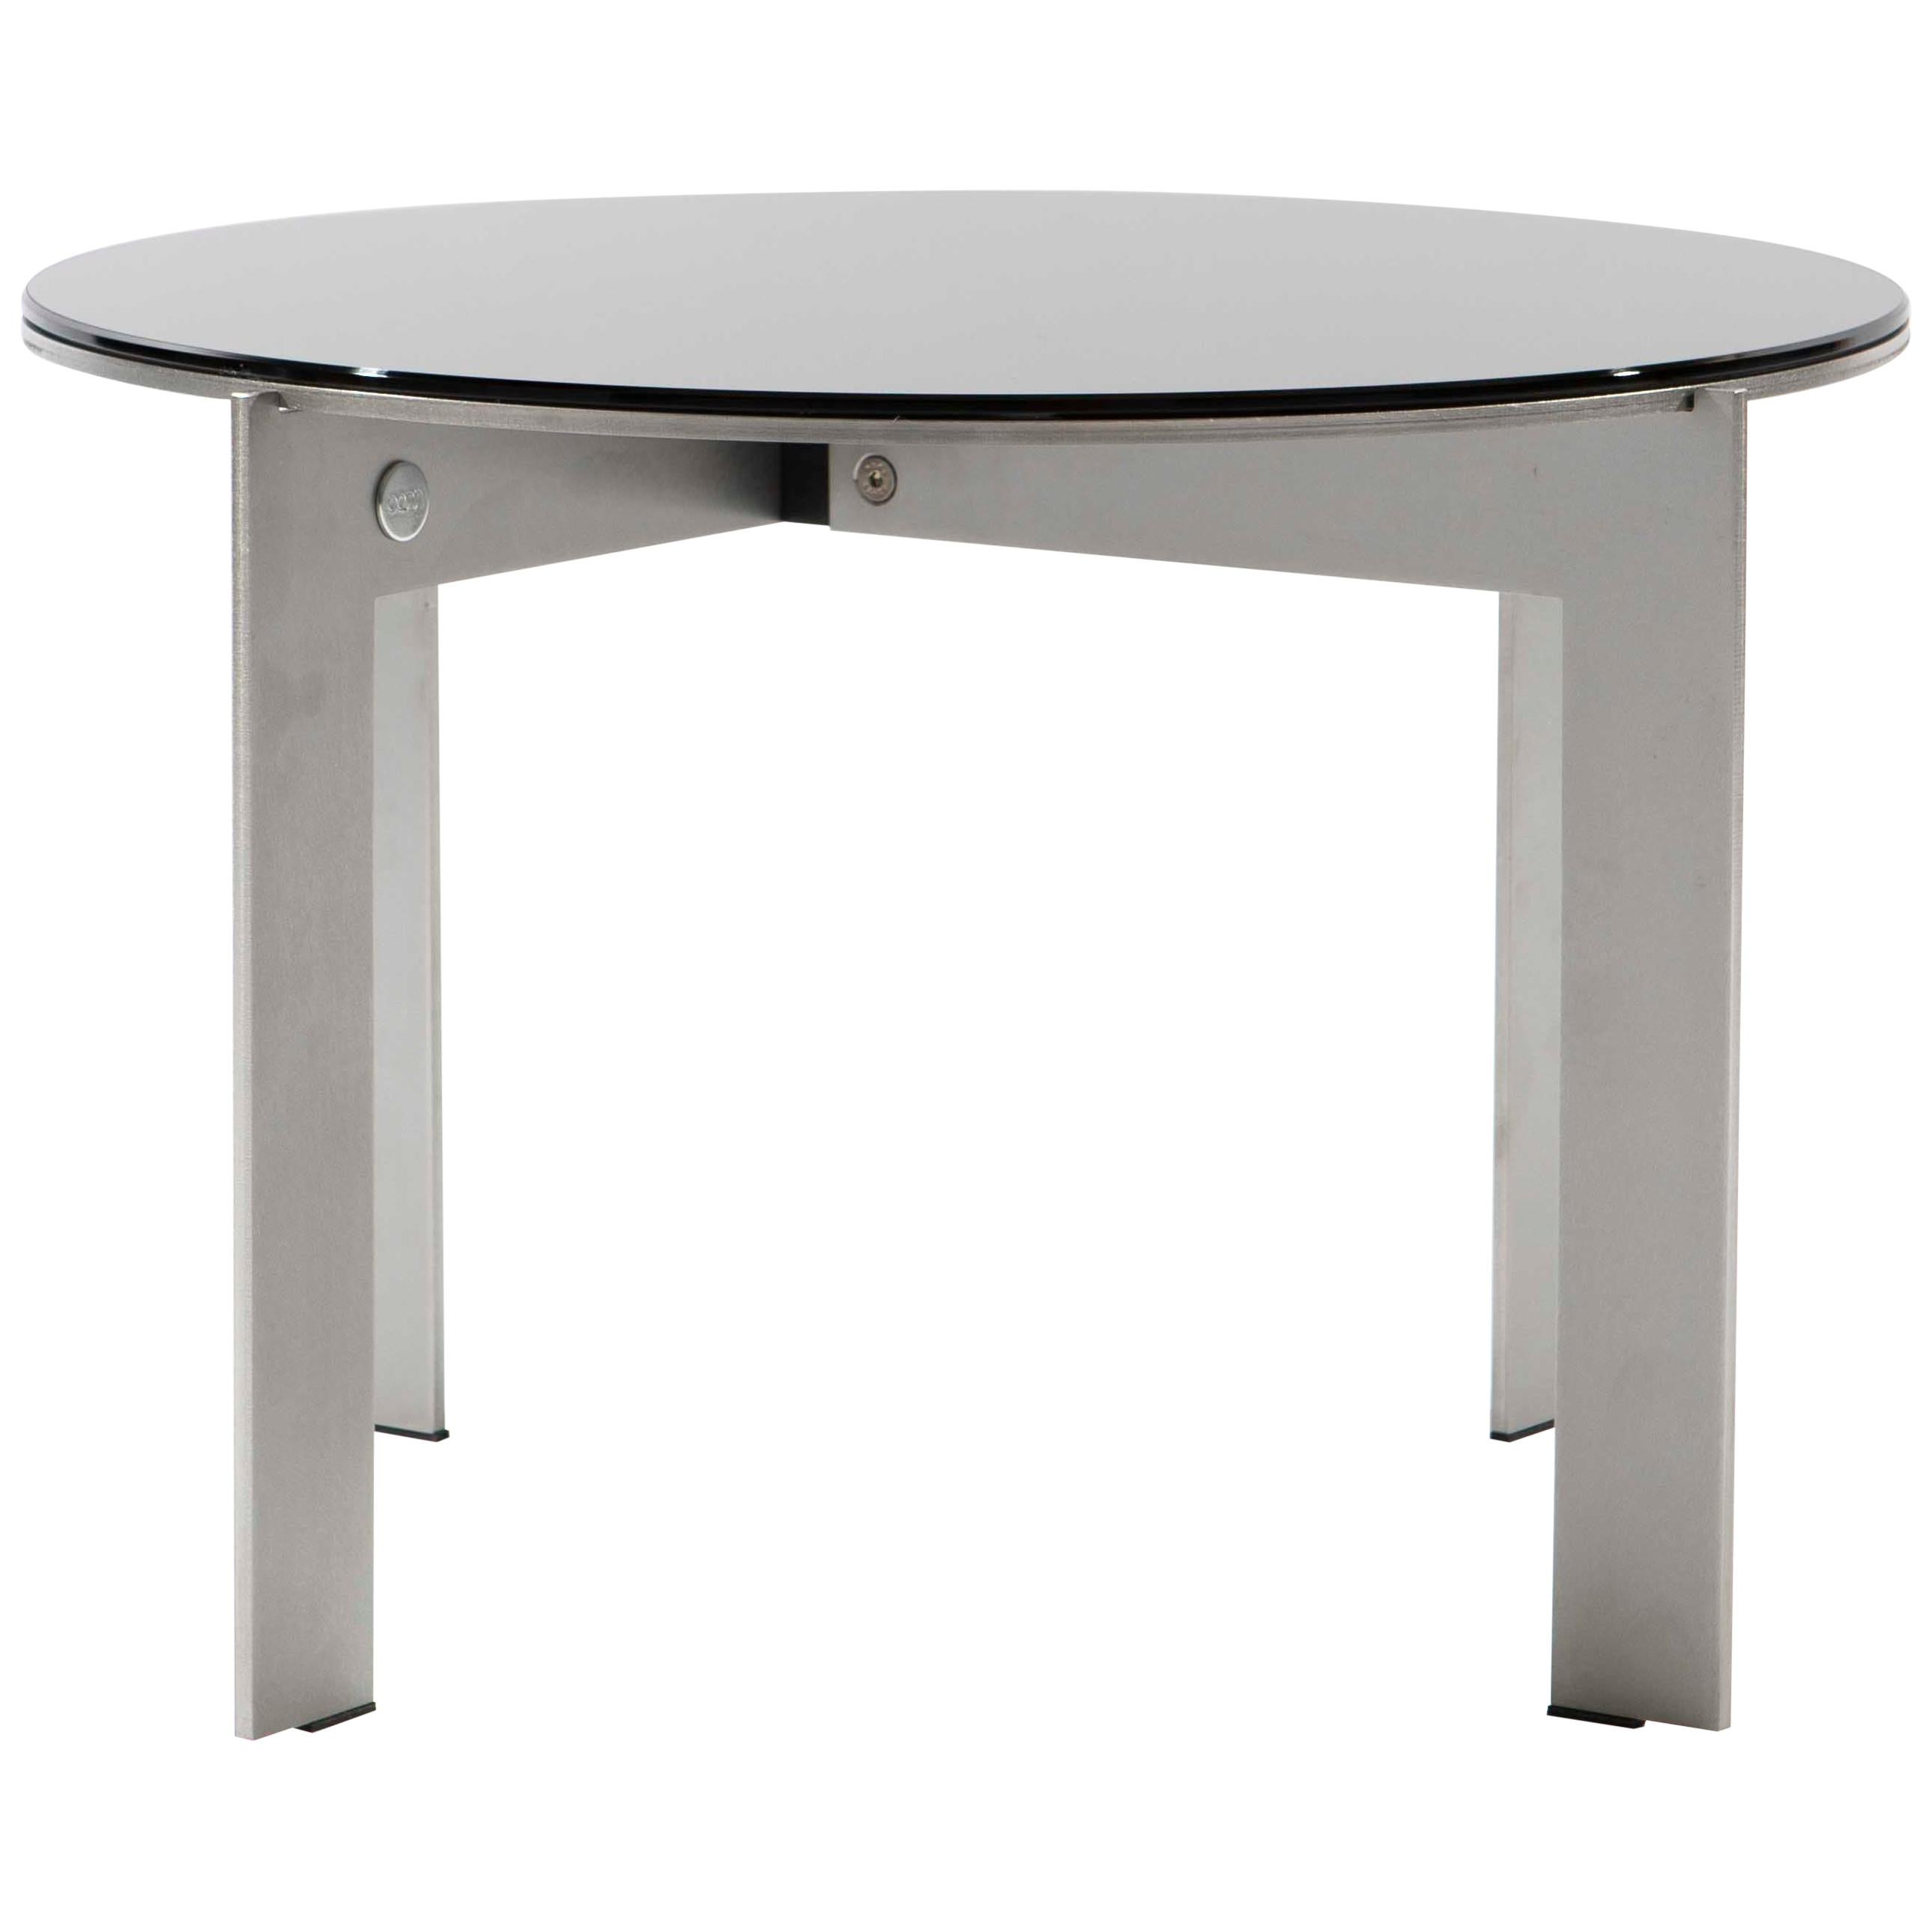 Contemporary Stainless Steel Side Table with Mirror Top, Joined RO34.4 by Barh